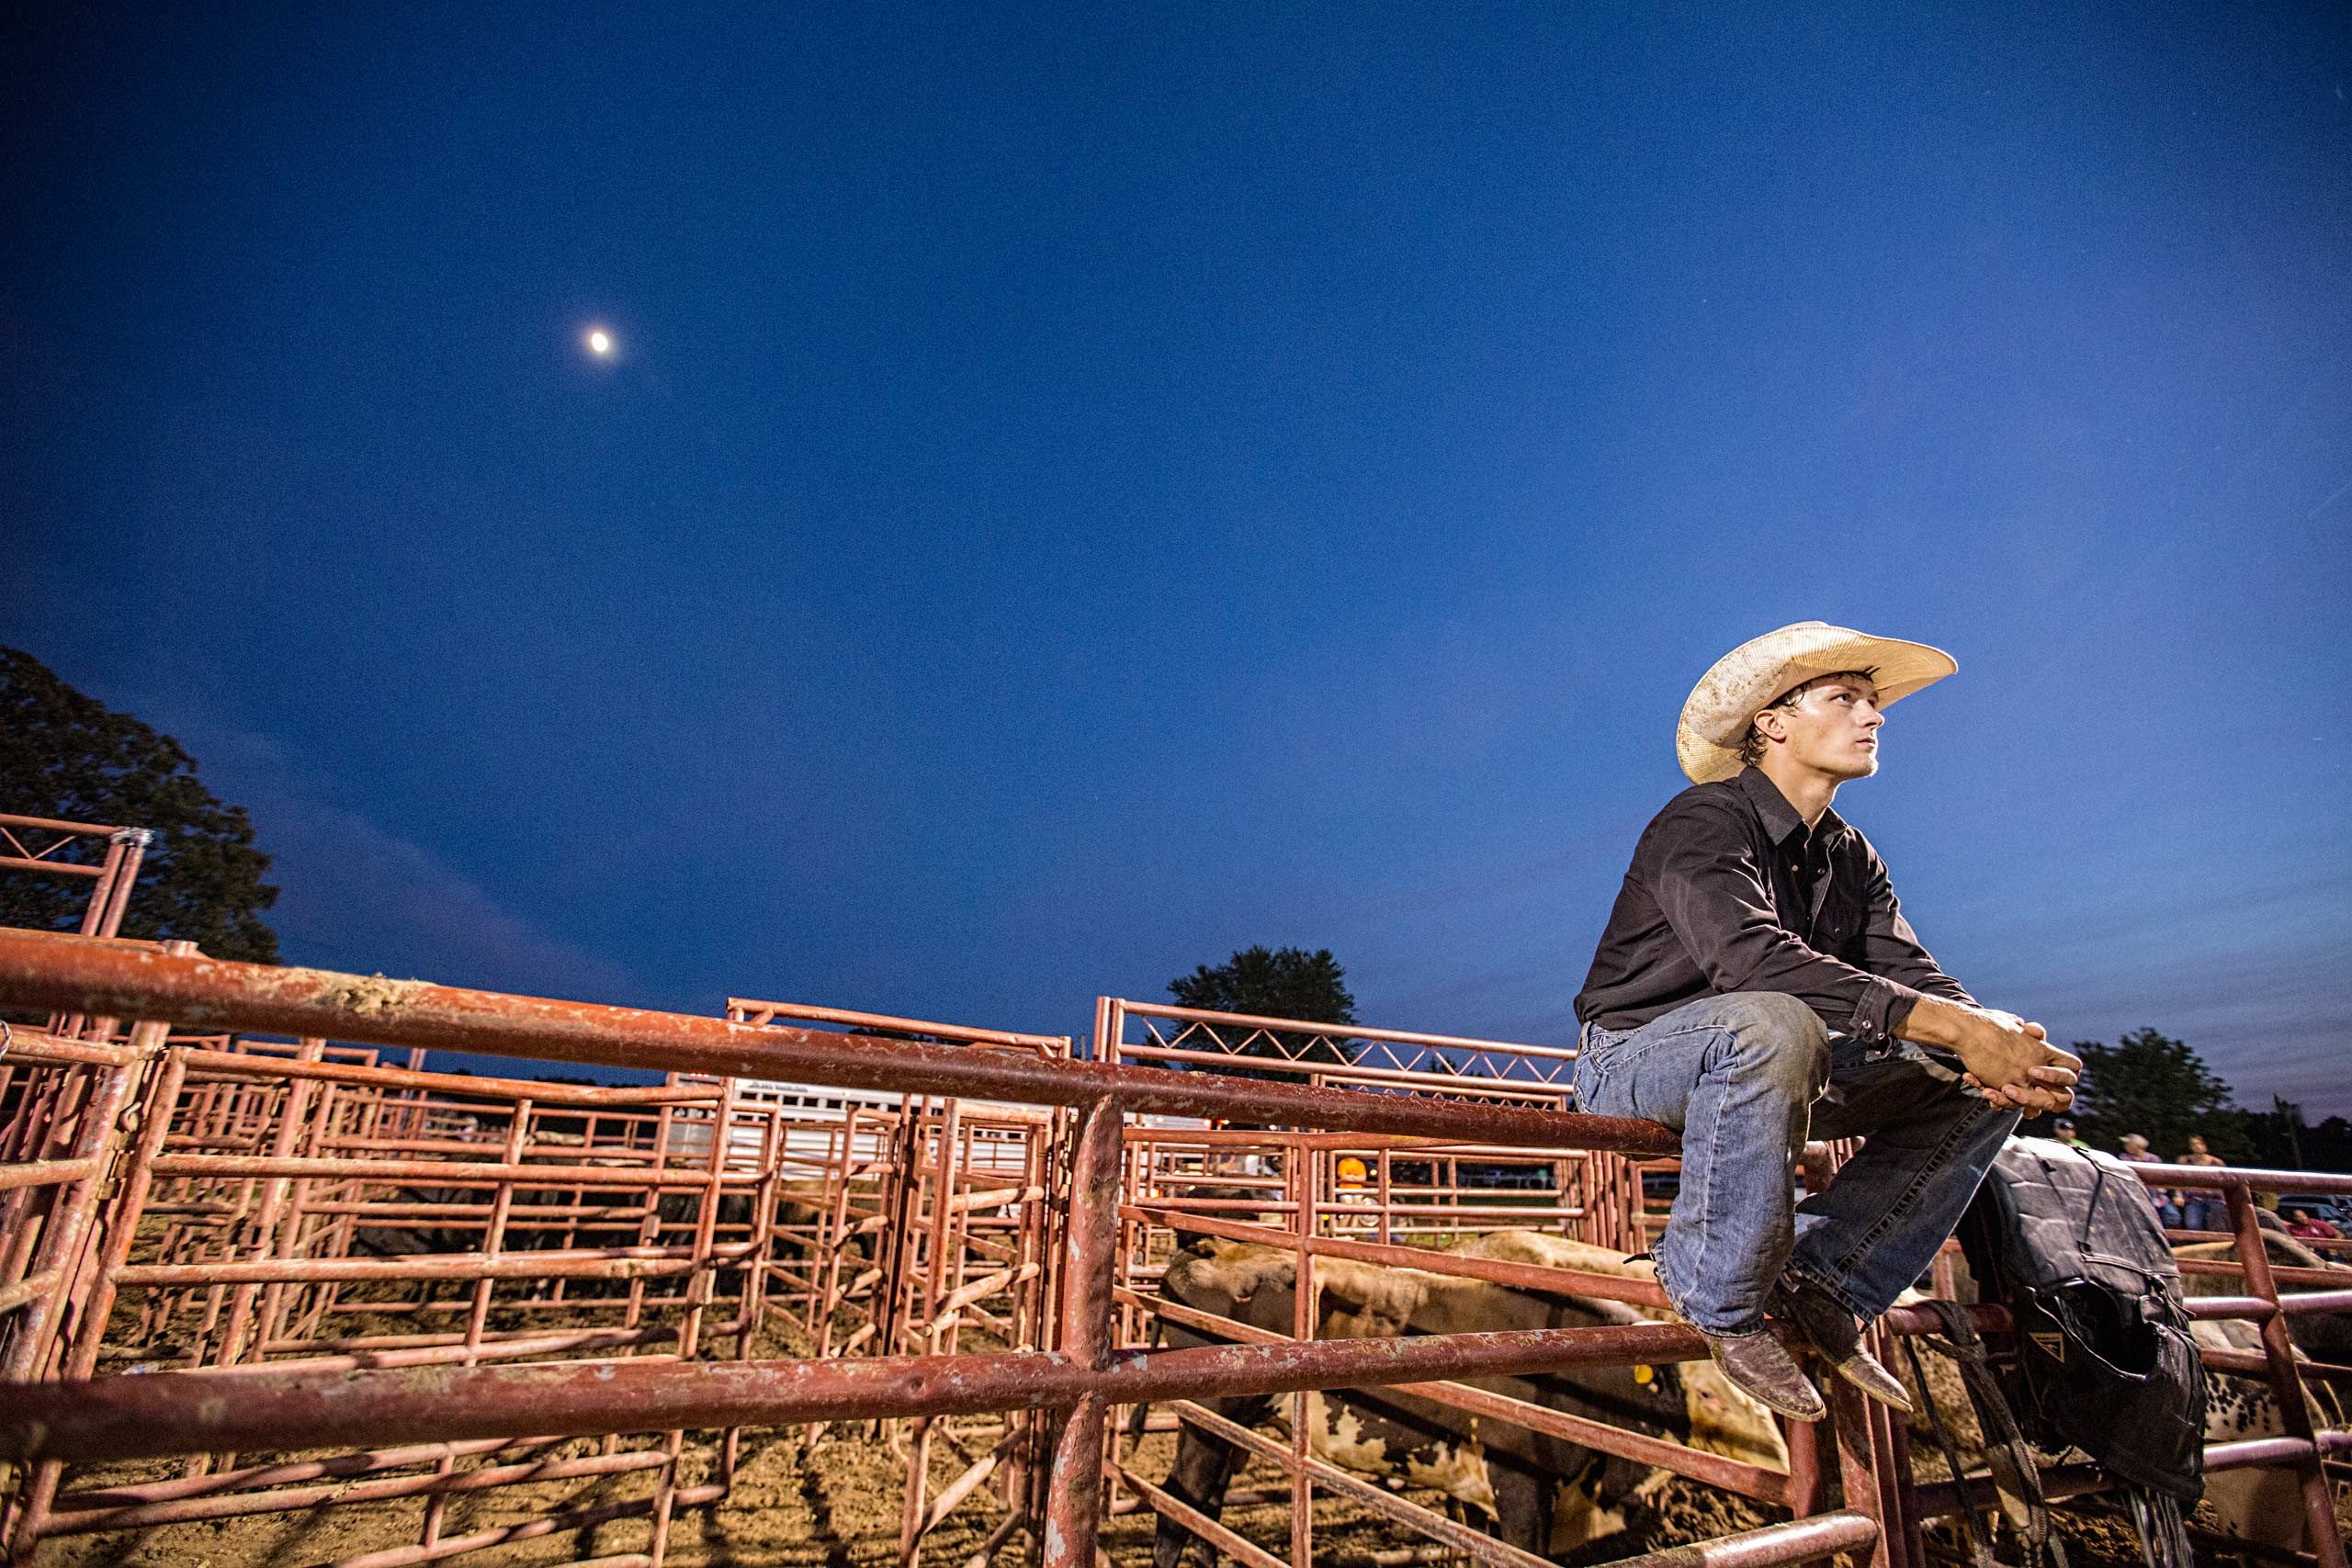 Cowboy Sitting On a Fence at Night Under the Moon